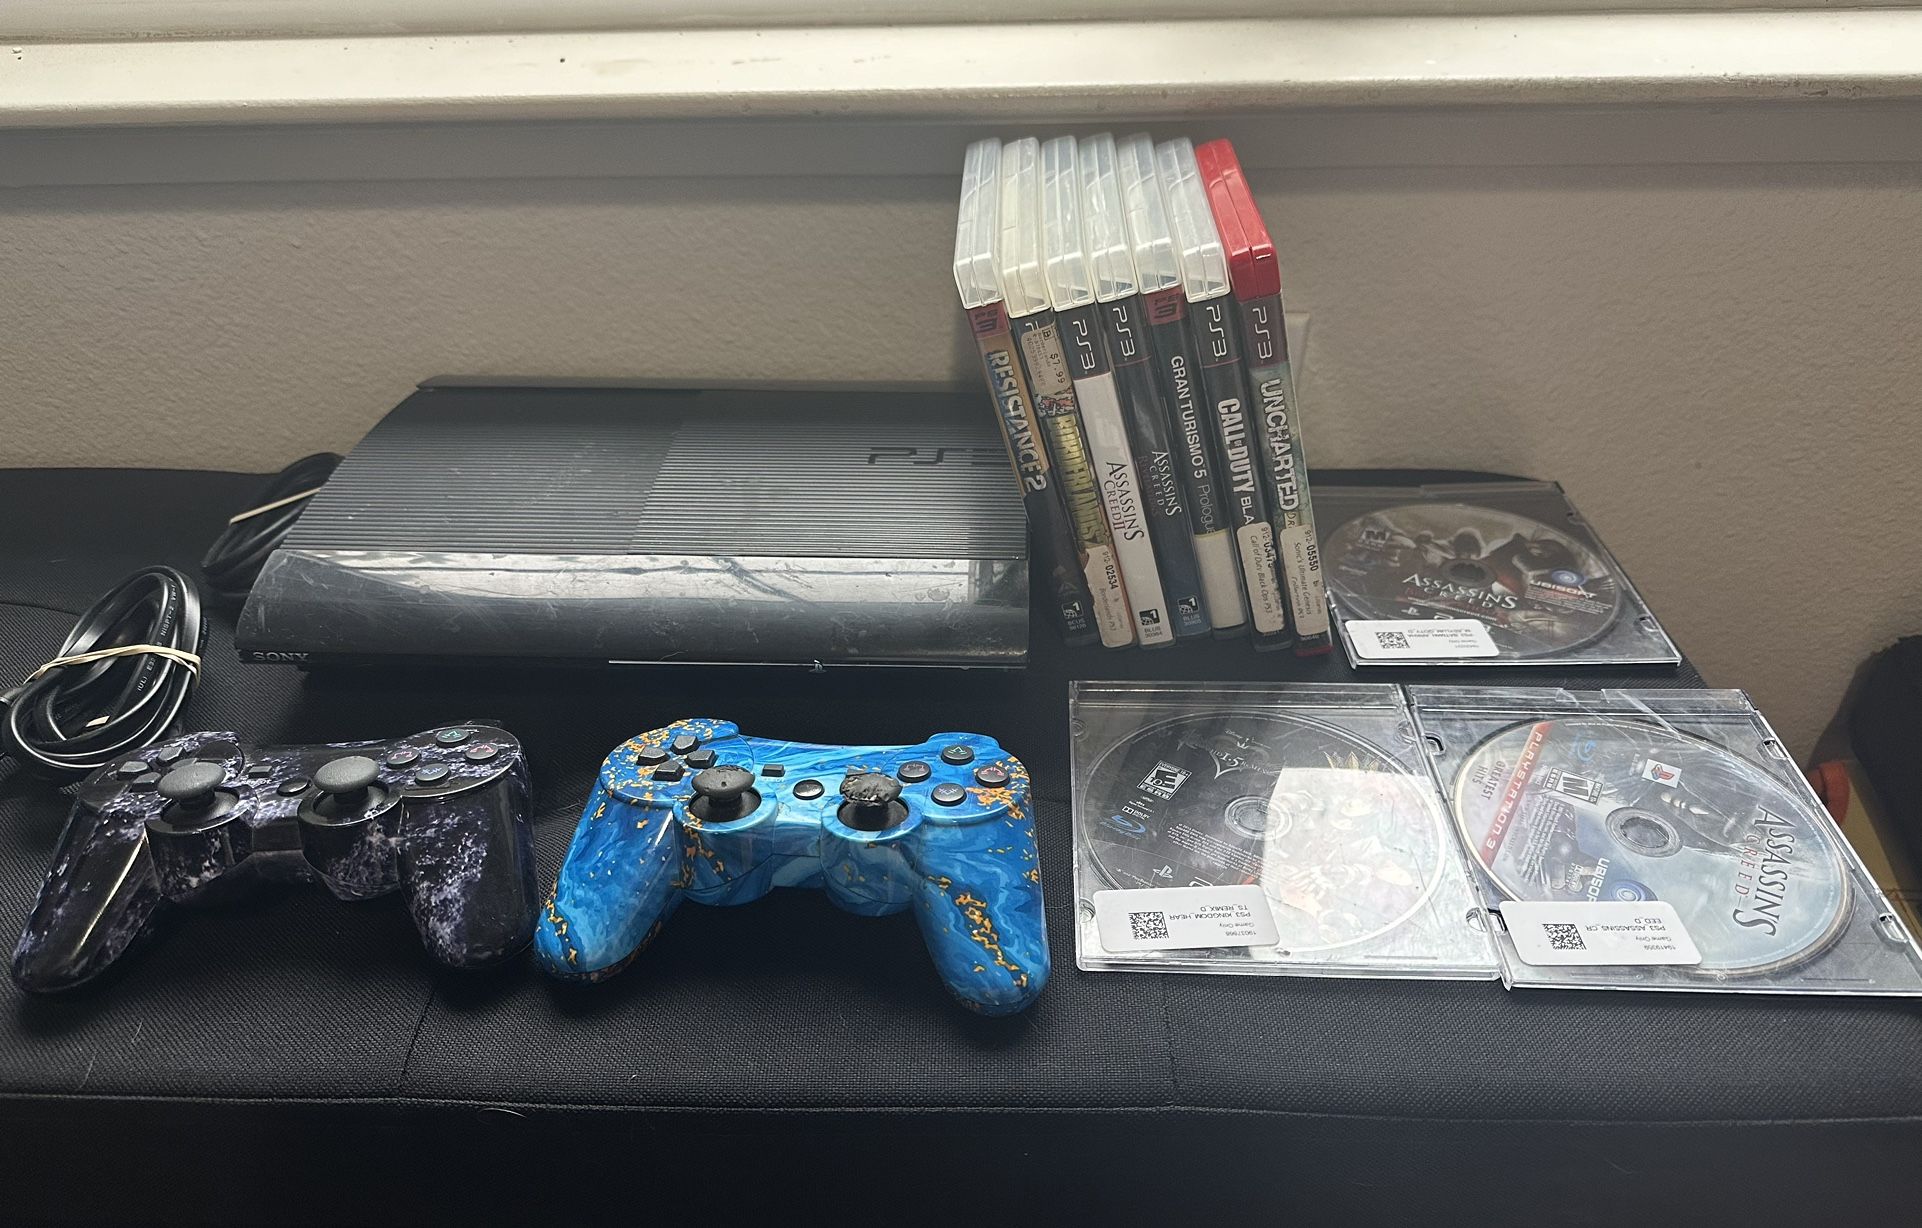 Ps3 Super Slim + 10 Games And 2 Controllers